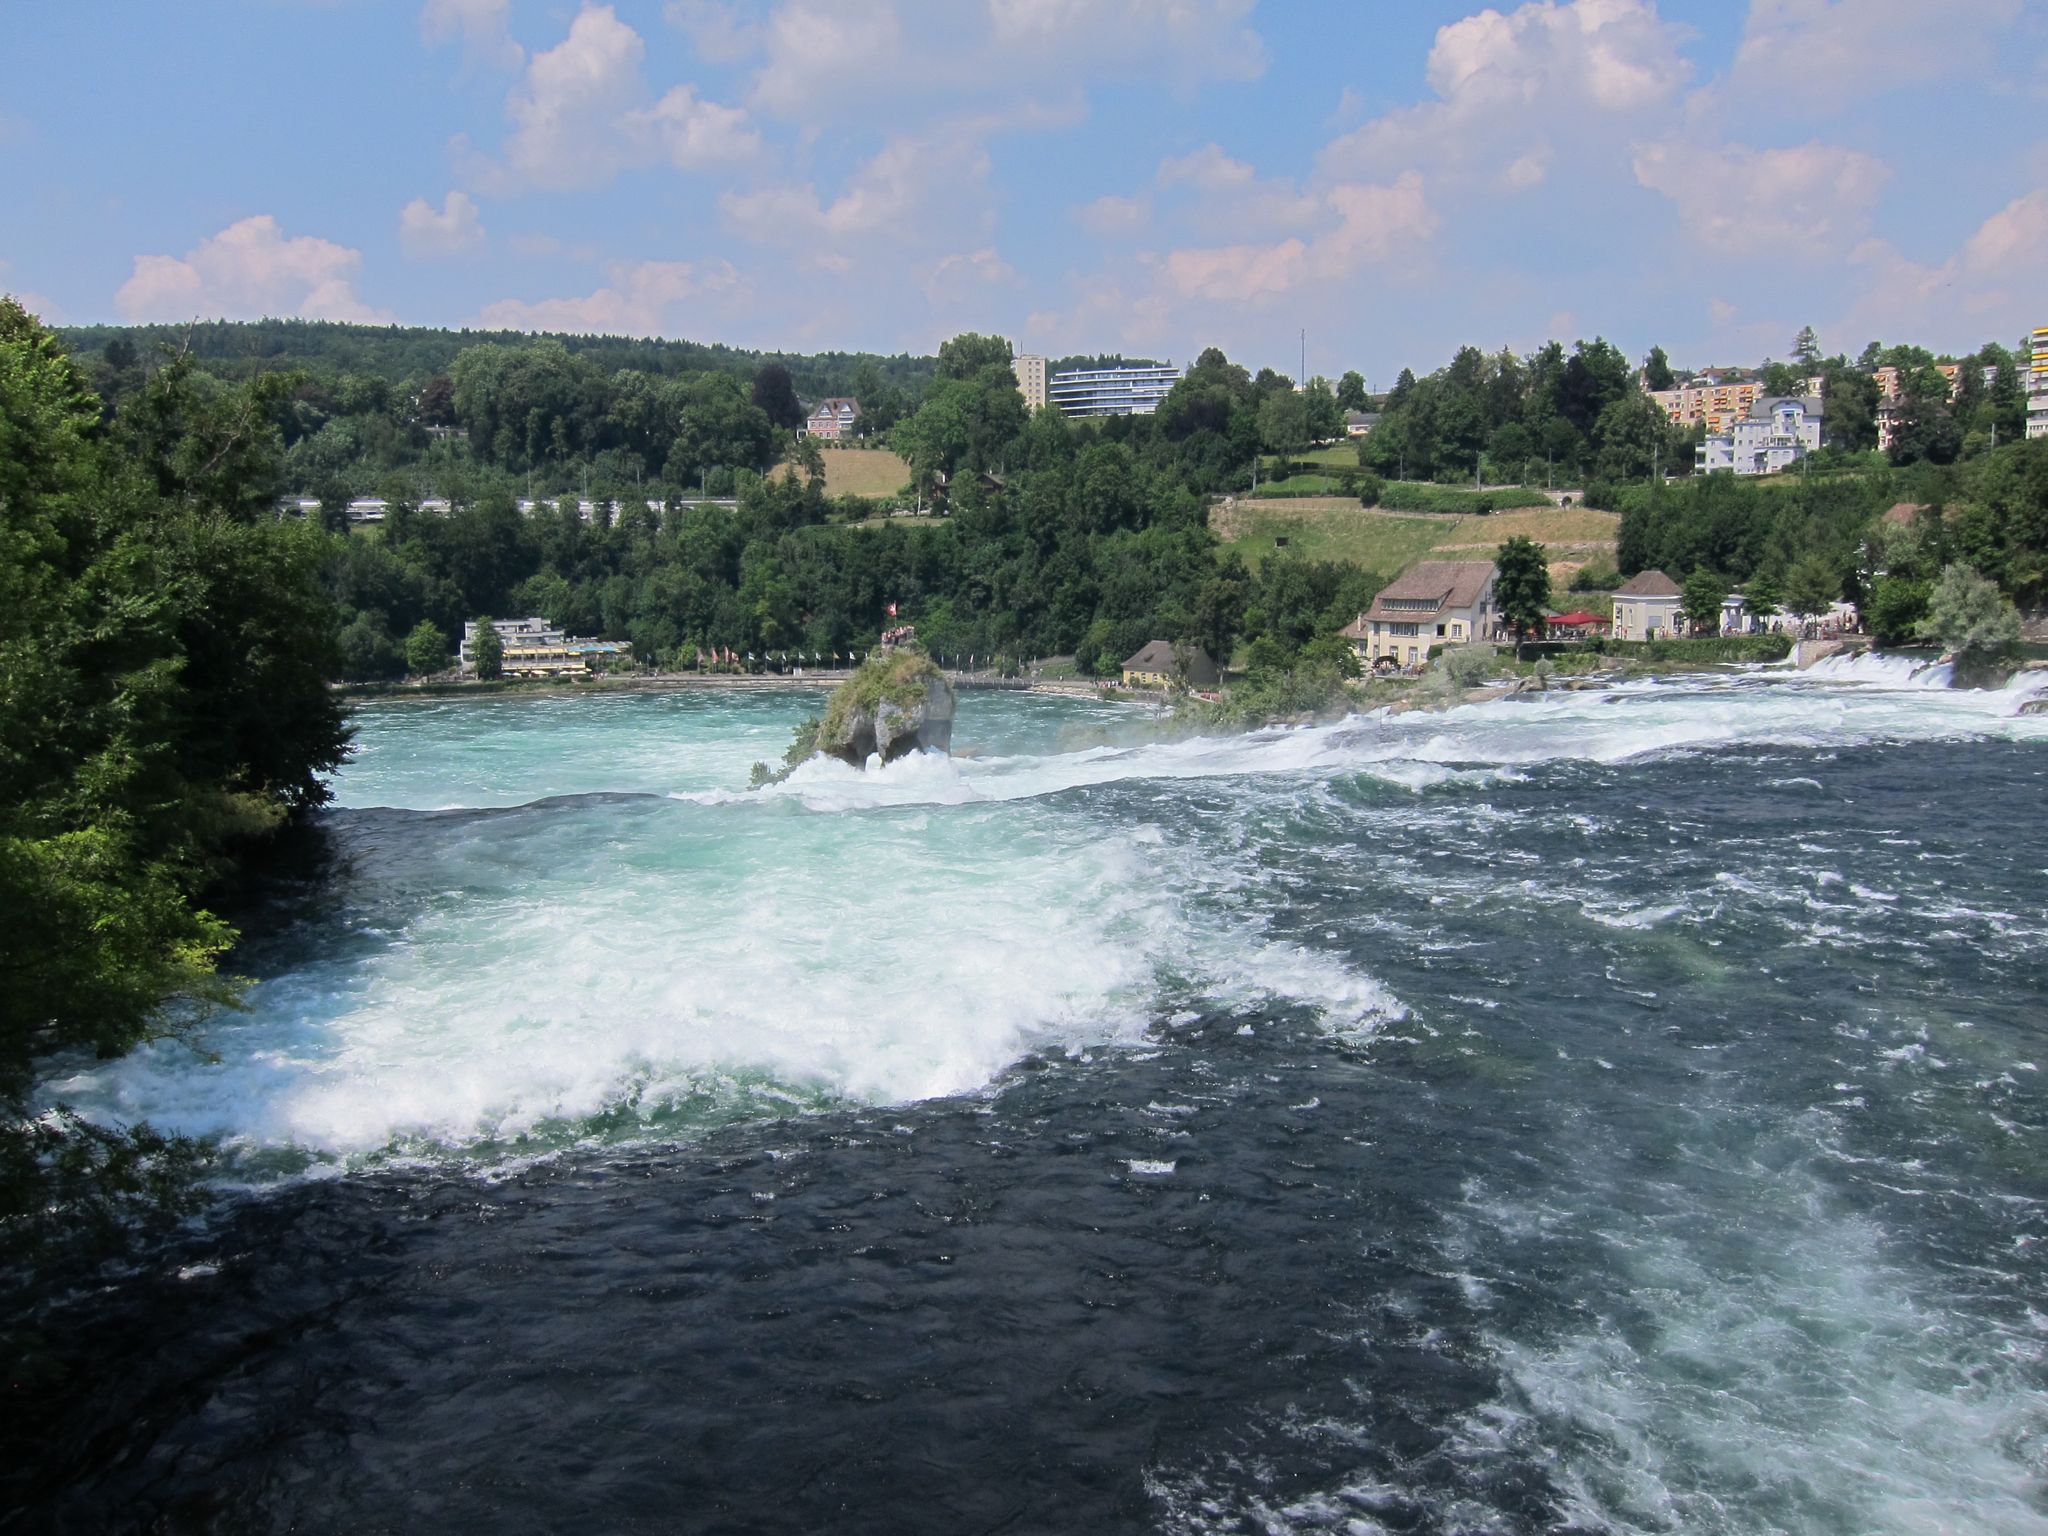 Photo 15 of 22 from the album Rheinfall.